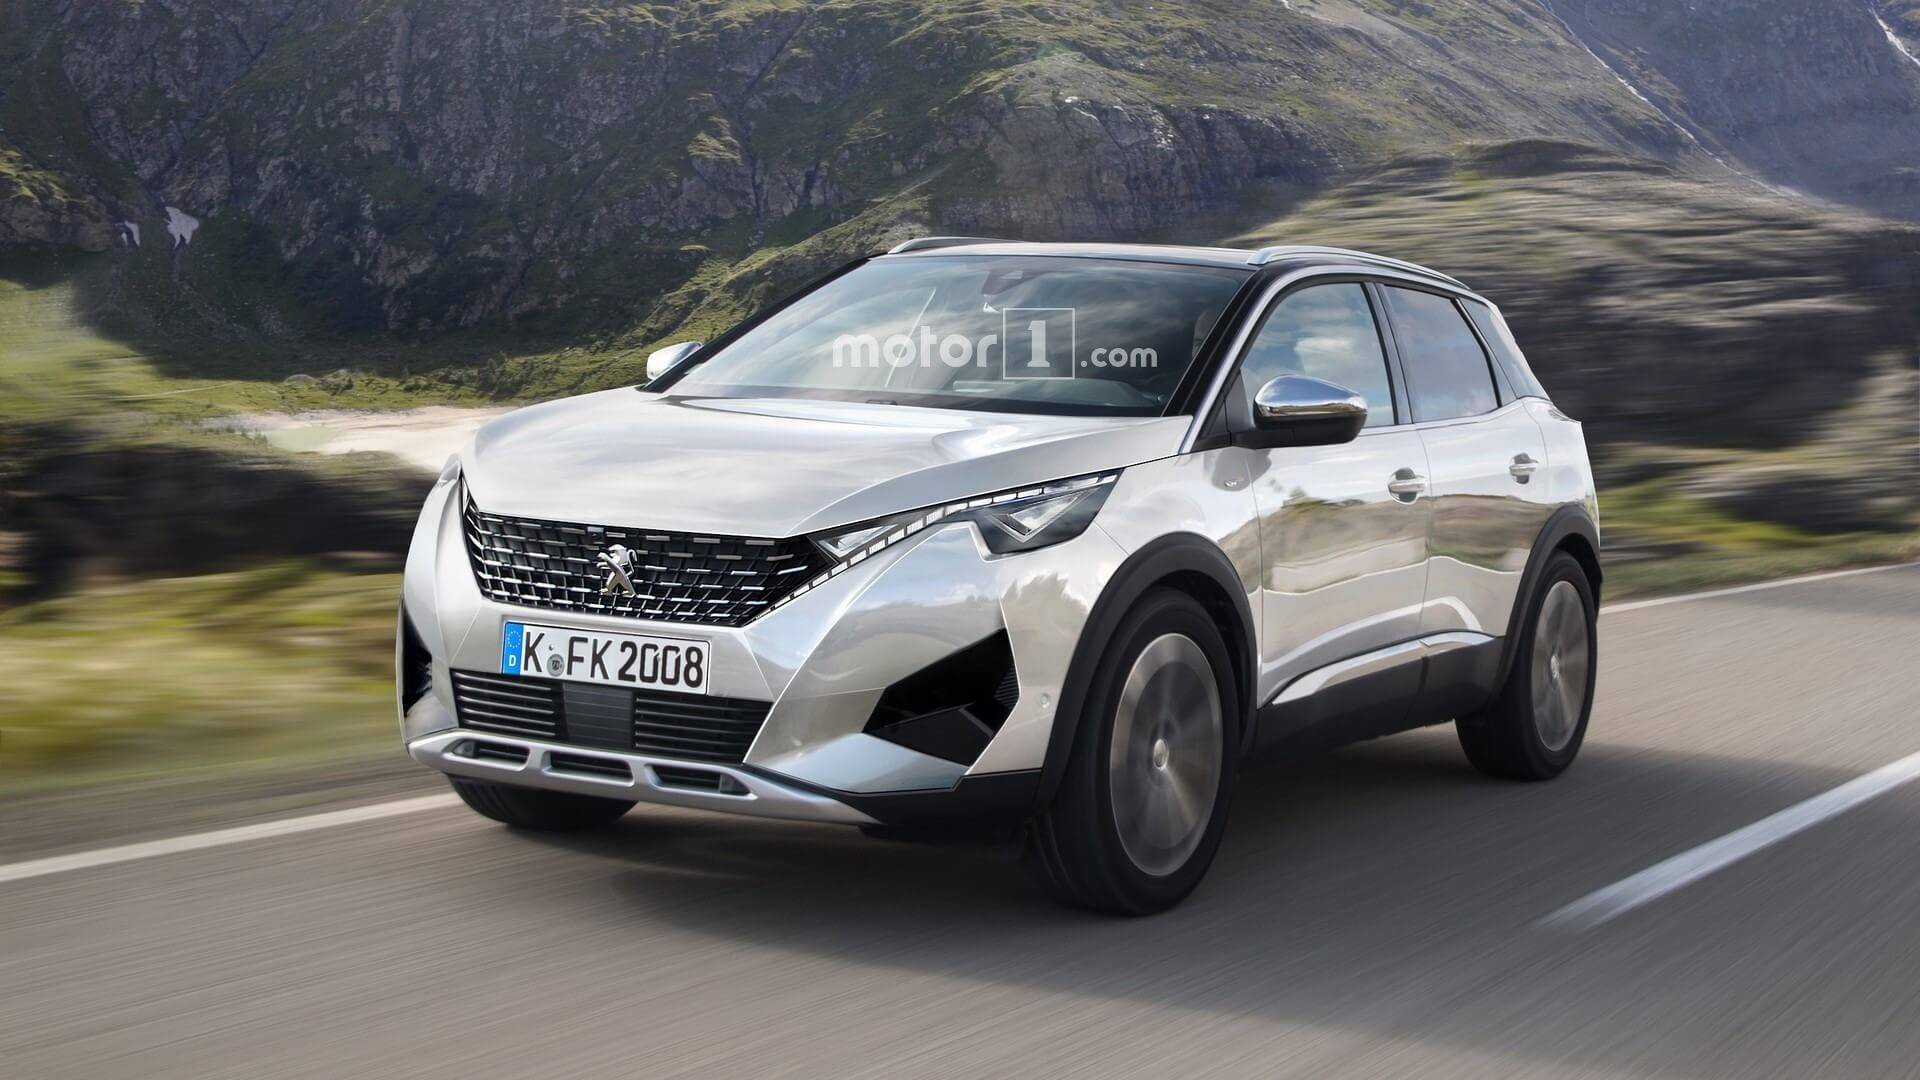 Next Generation Peugeot 2008 Rendered With 3008 Cues